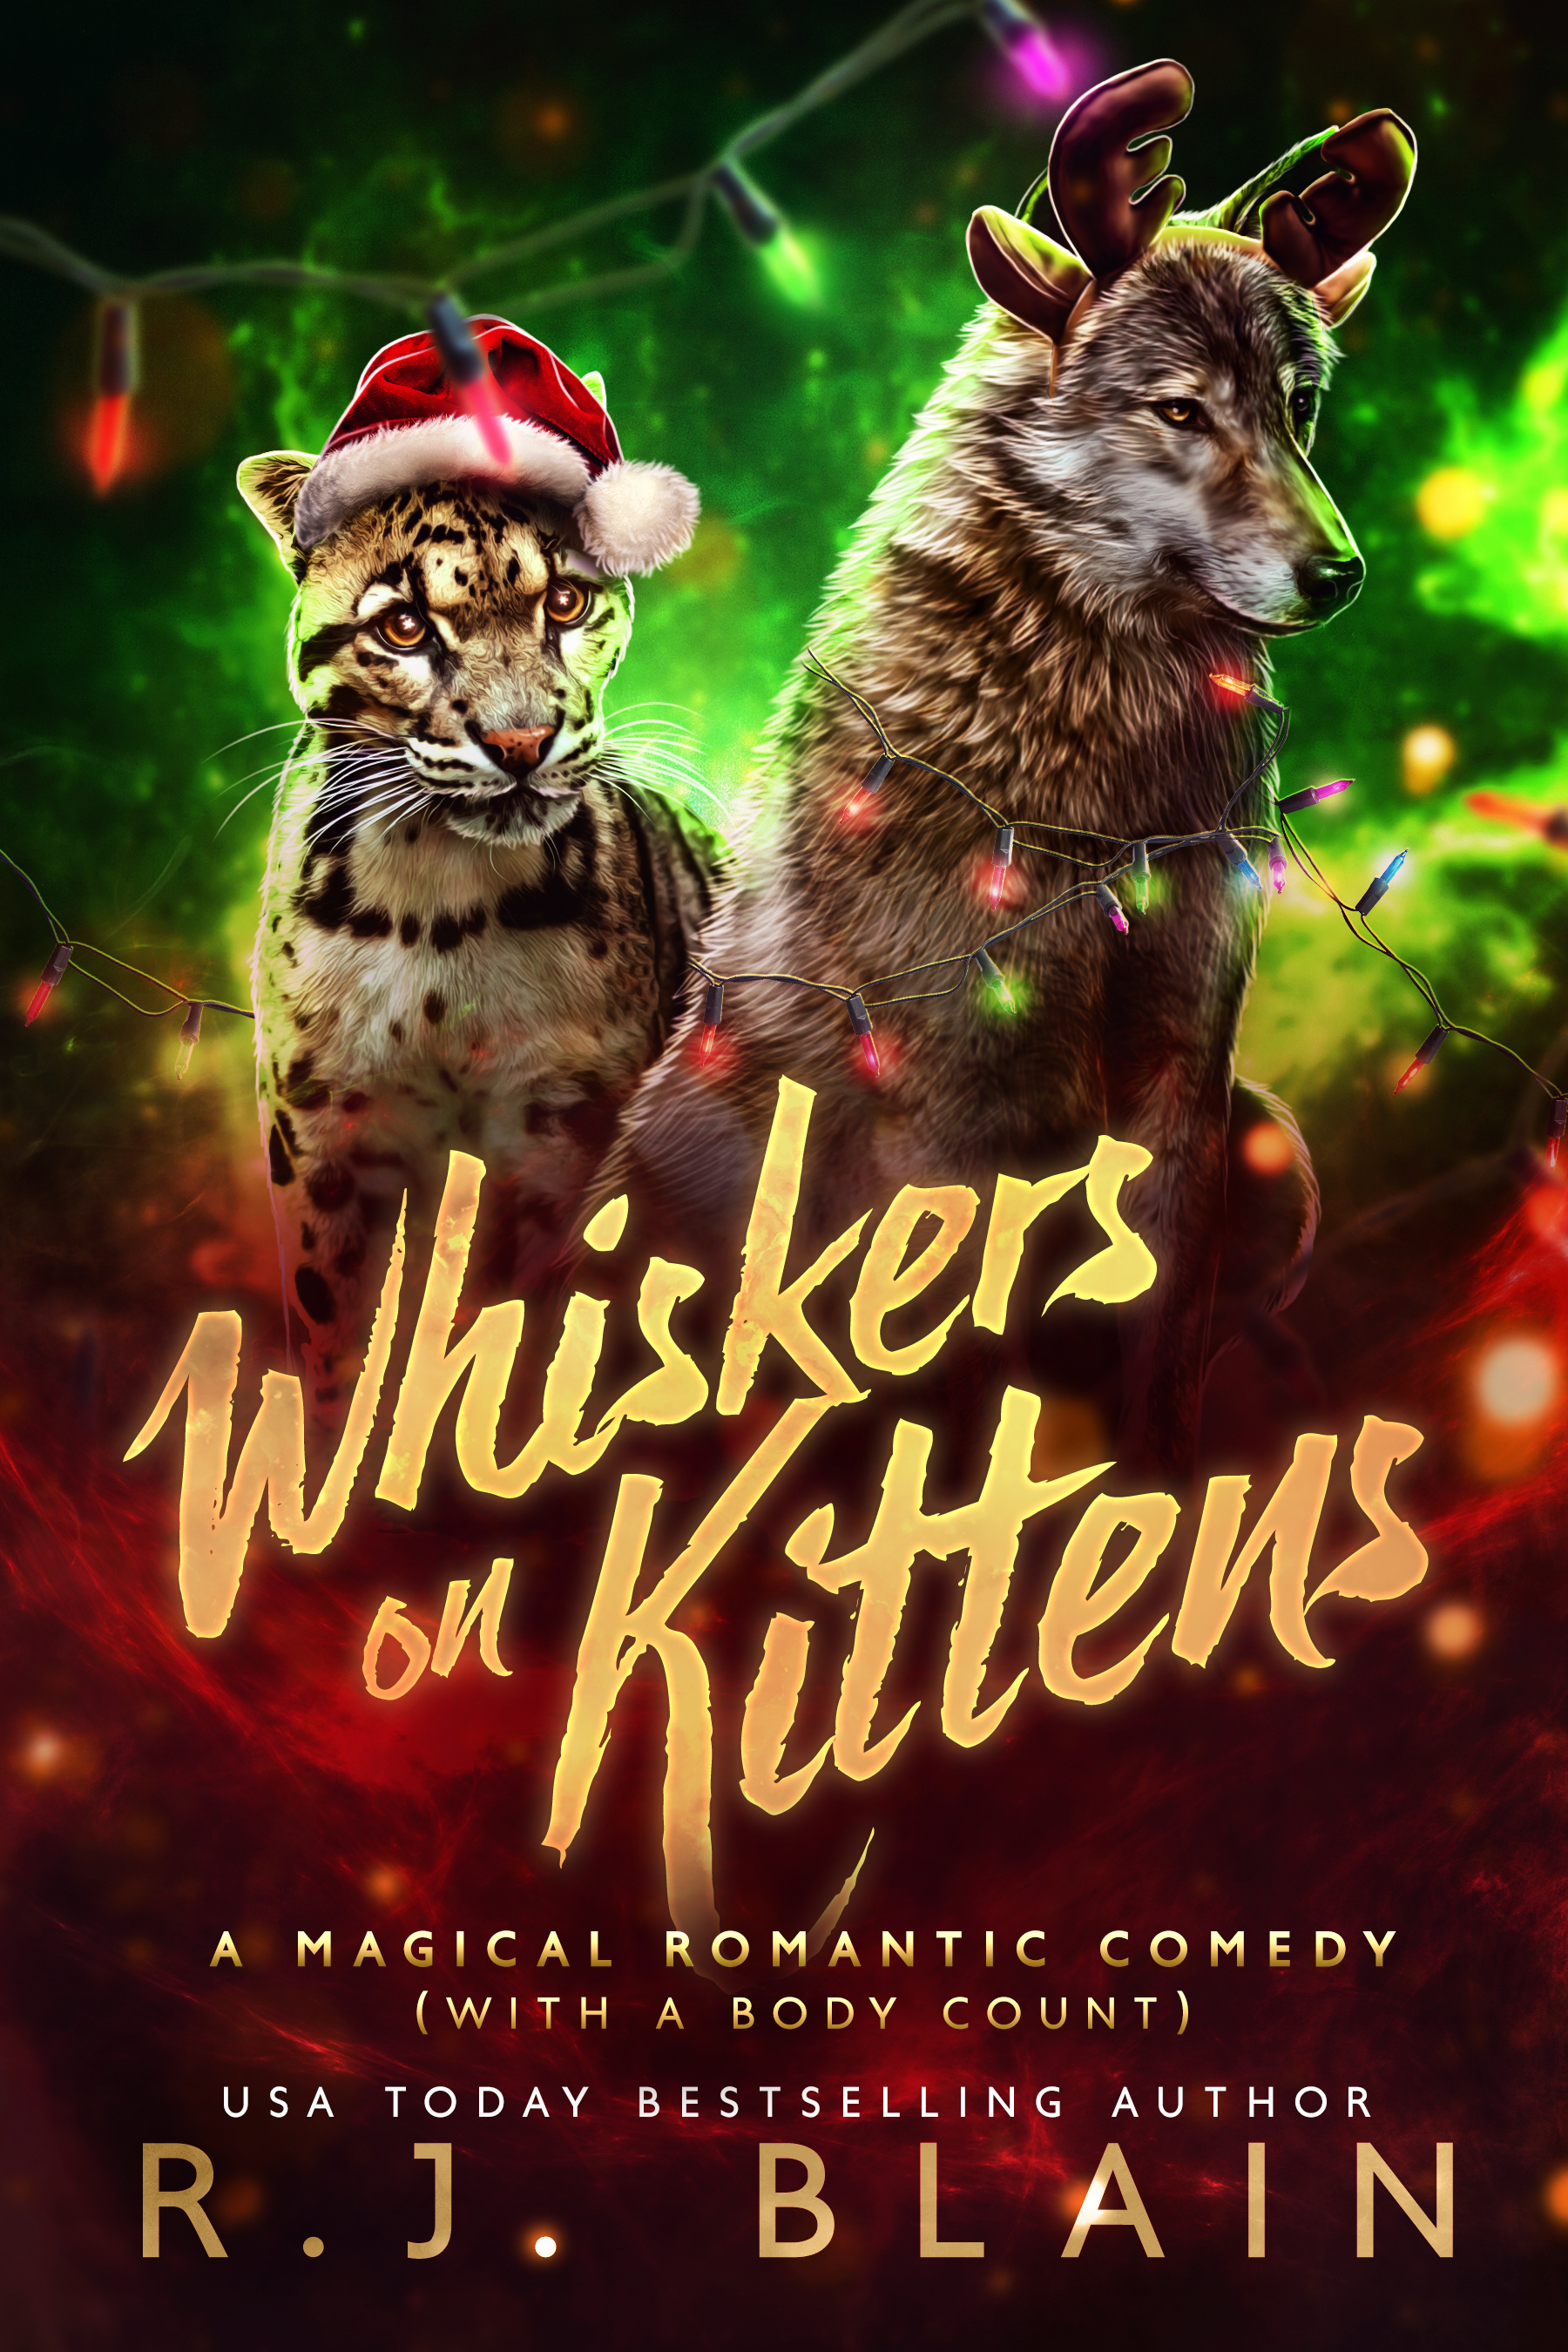 Whiskers on Kittens book cover